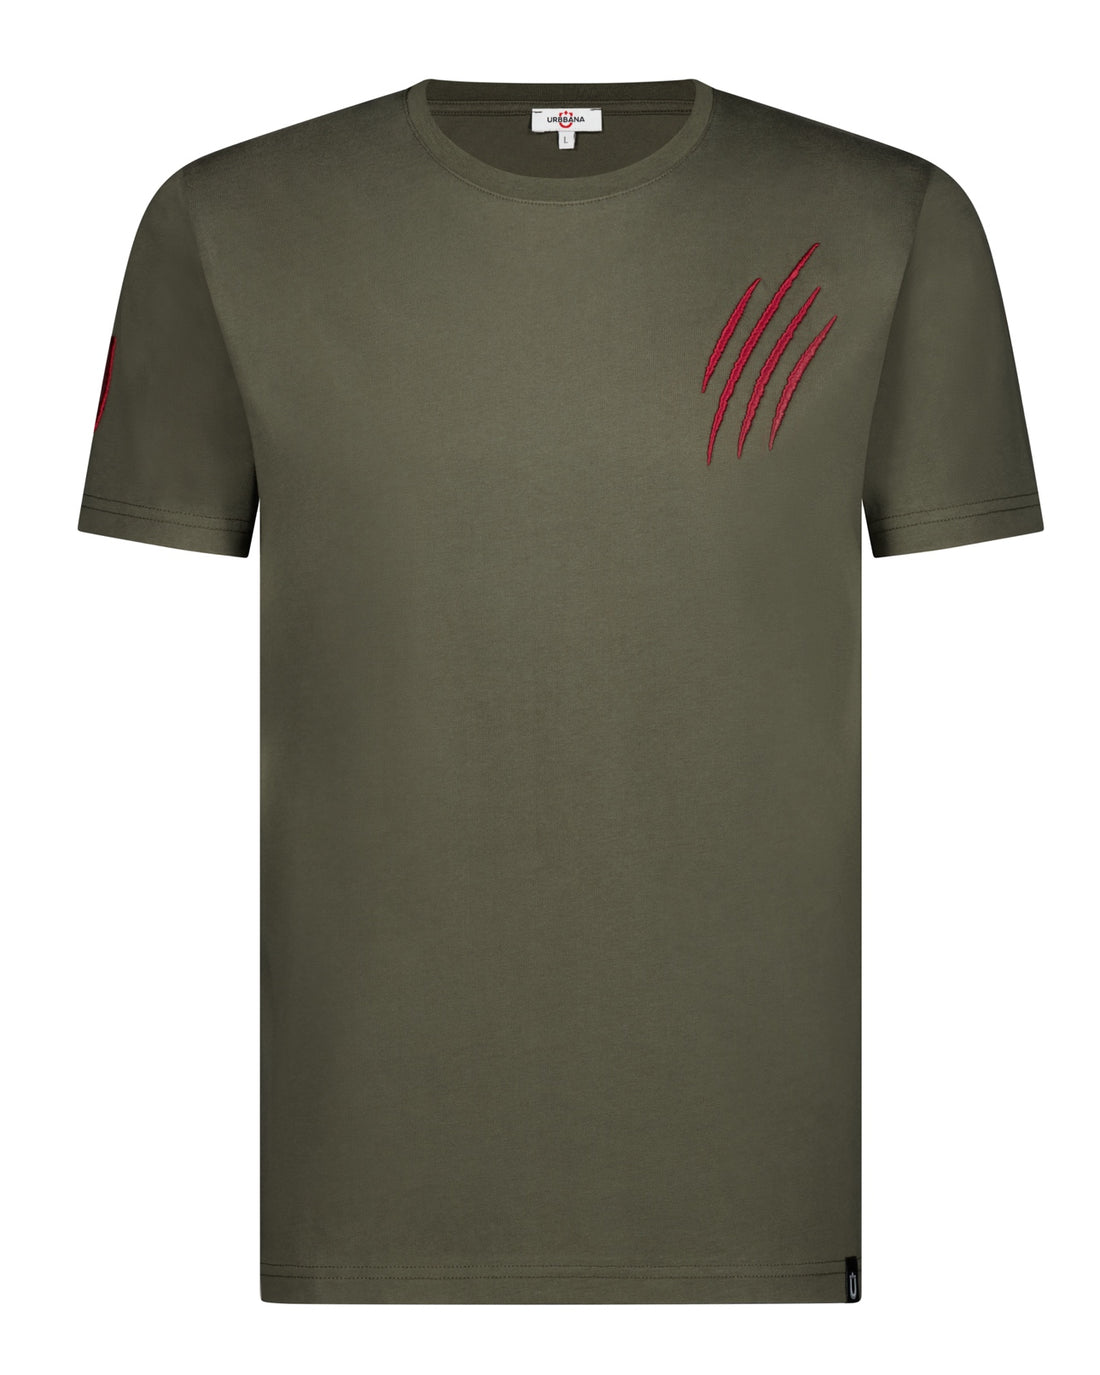 Fine Cotton T-shirt with Claw Embroidery - Khaki Green